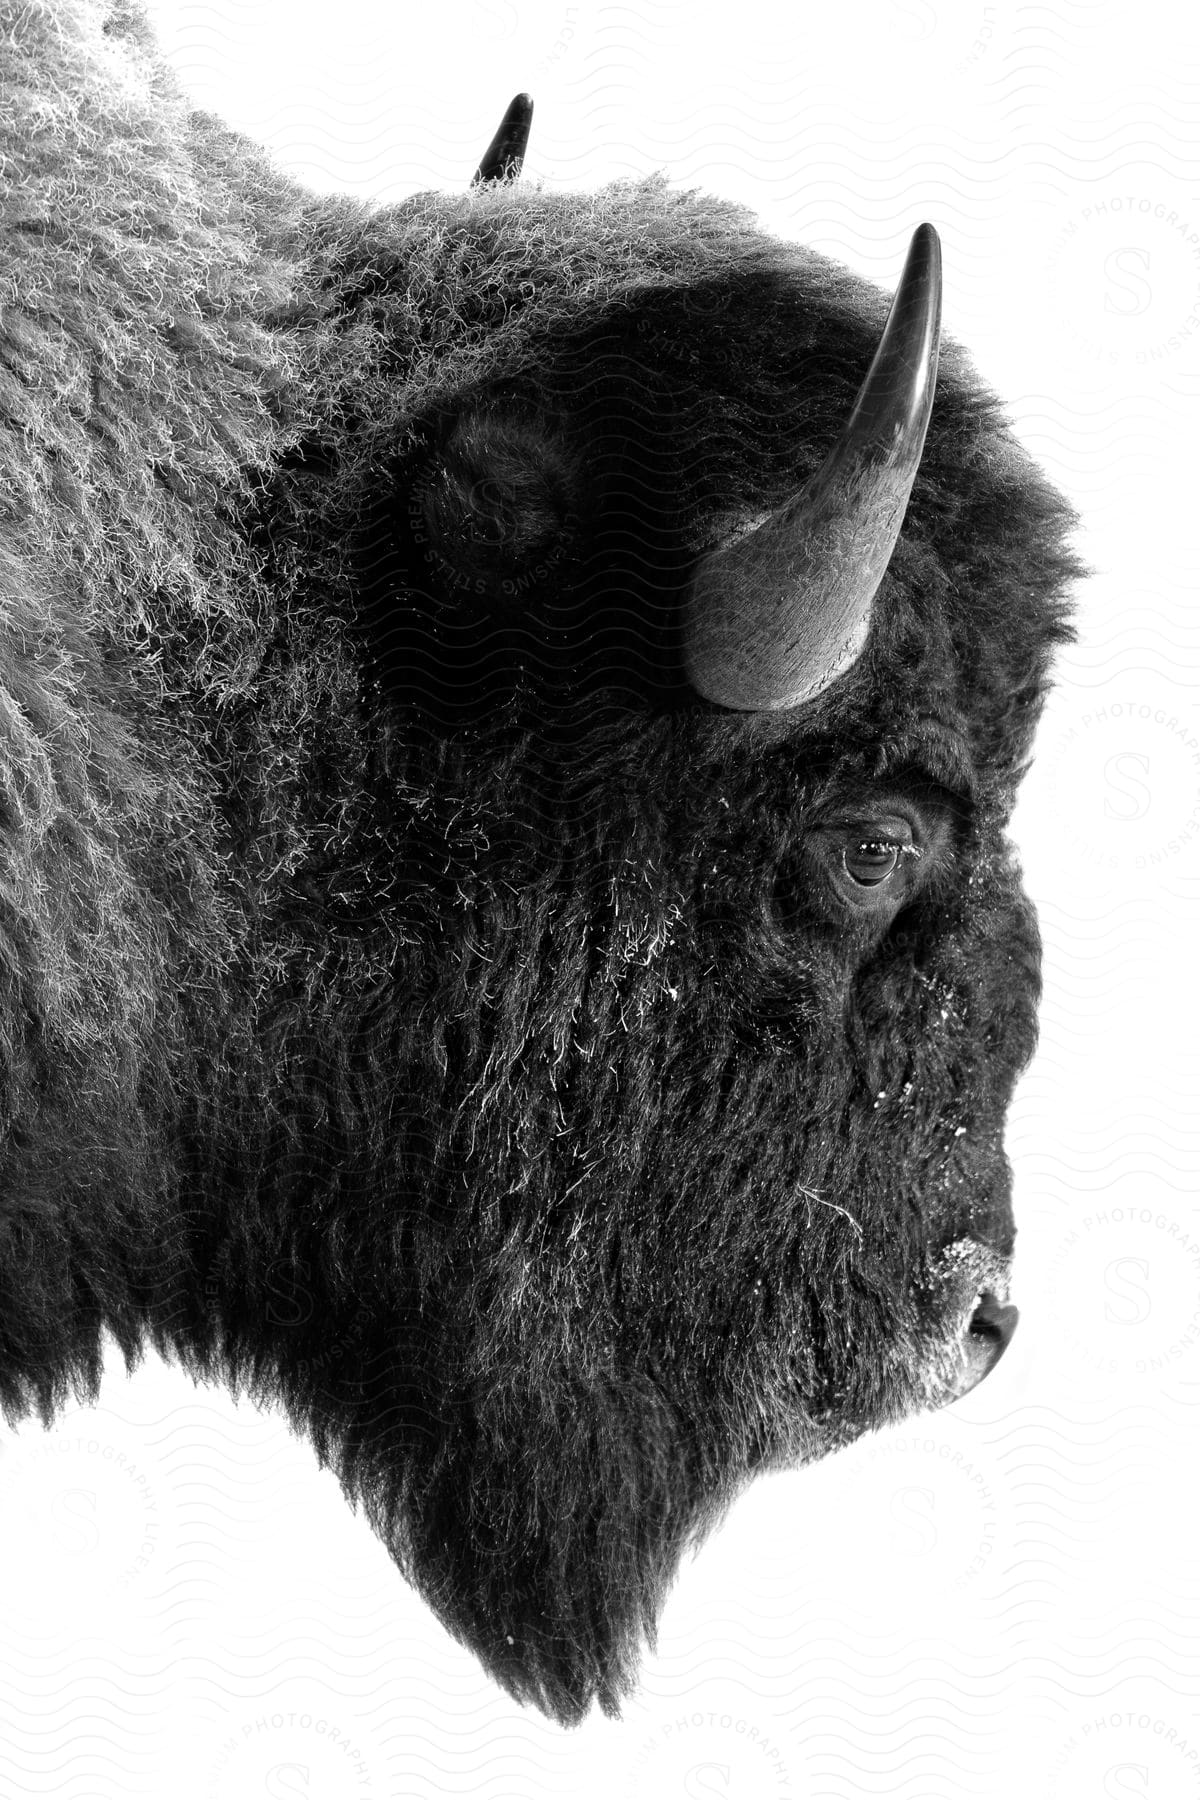 Side view of the head of a bison